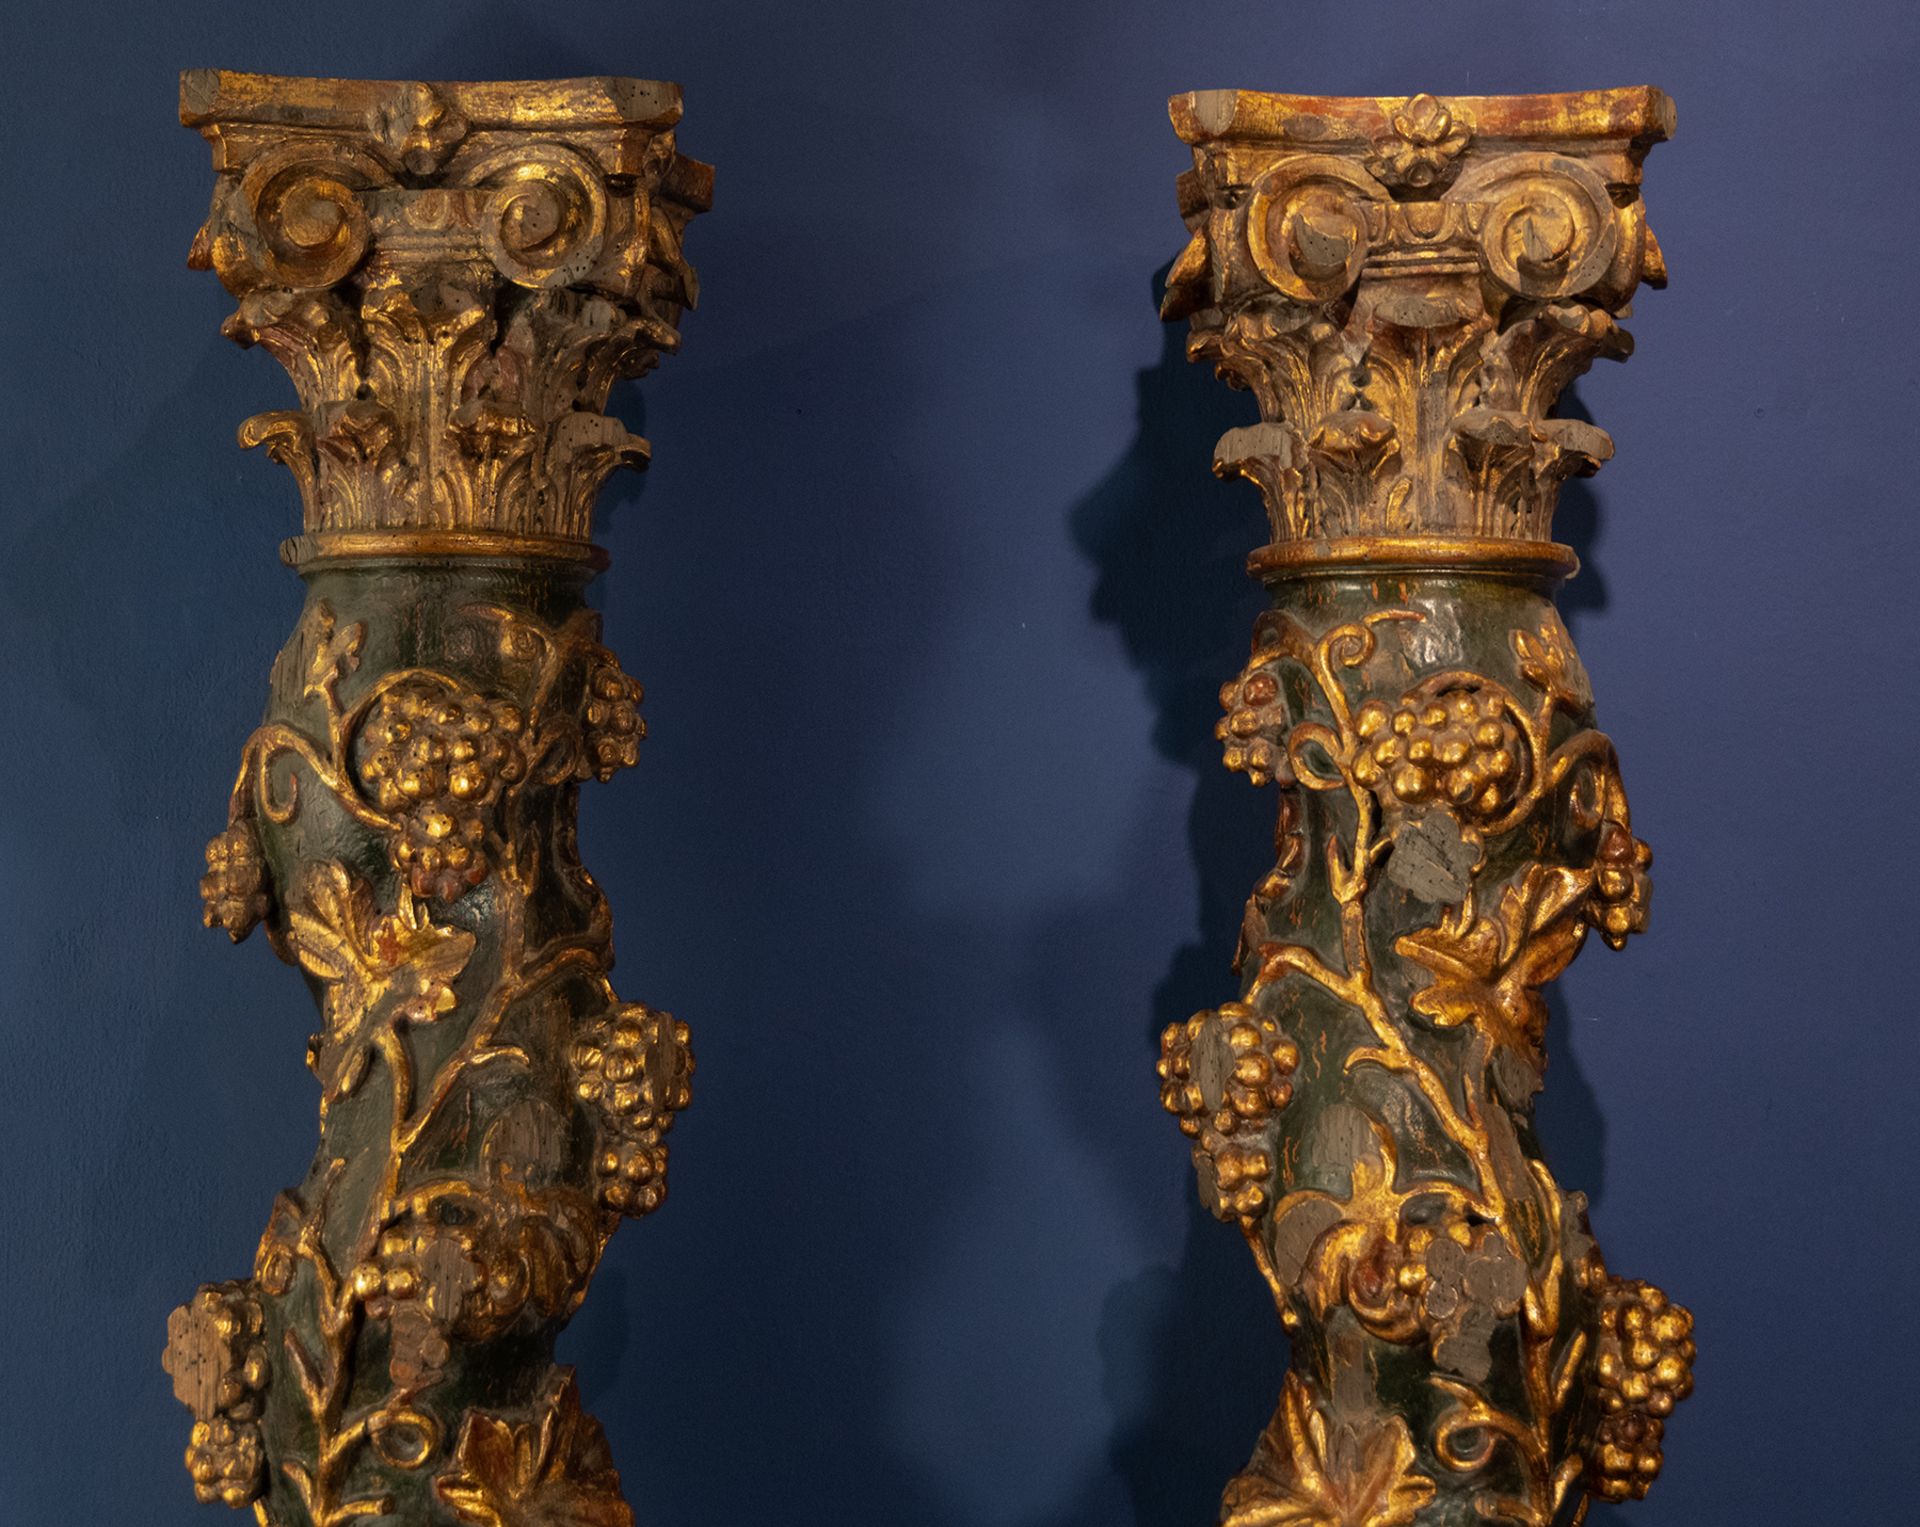 Pair of Large Solomonic Columns, 17th century, in carved, polychromed and gilt wood - Image 2 of 4